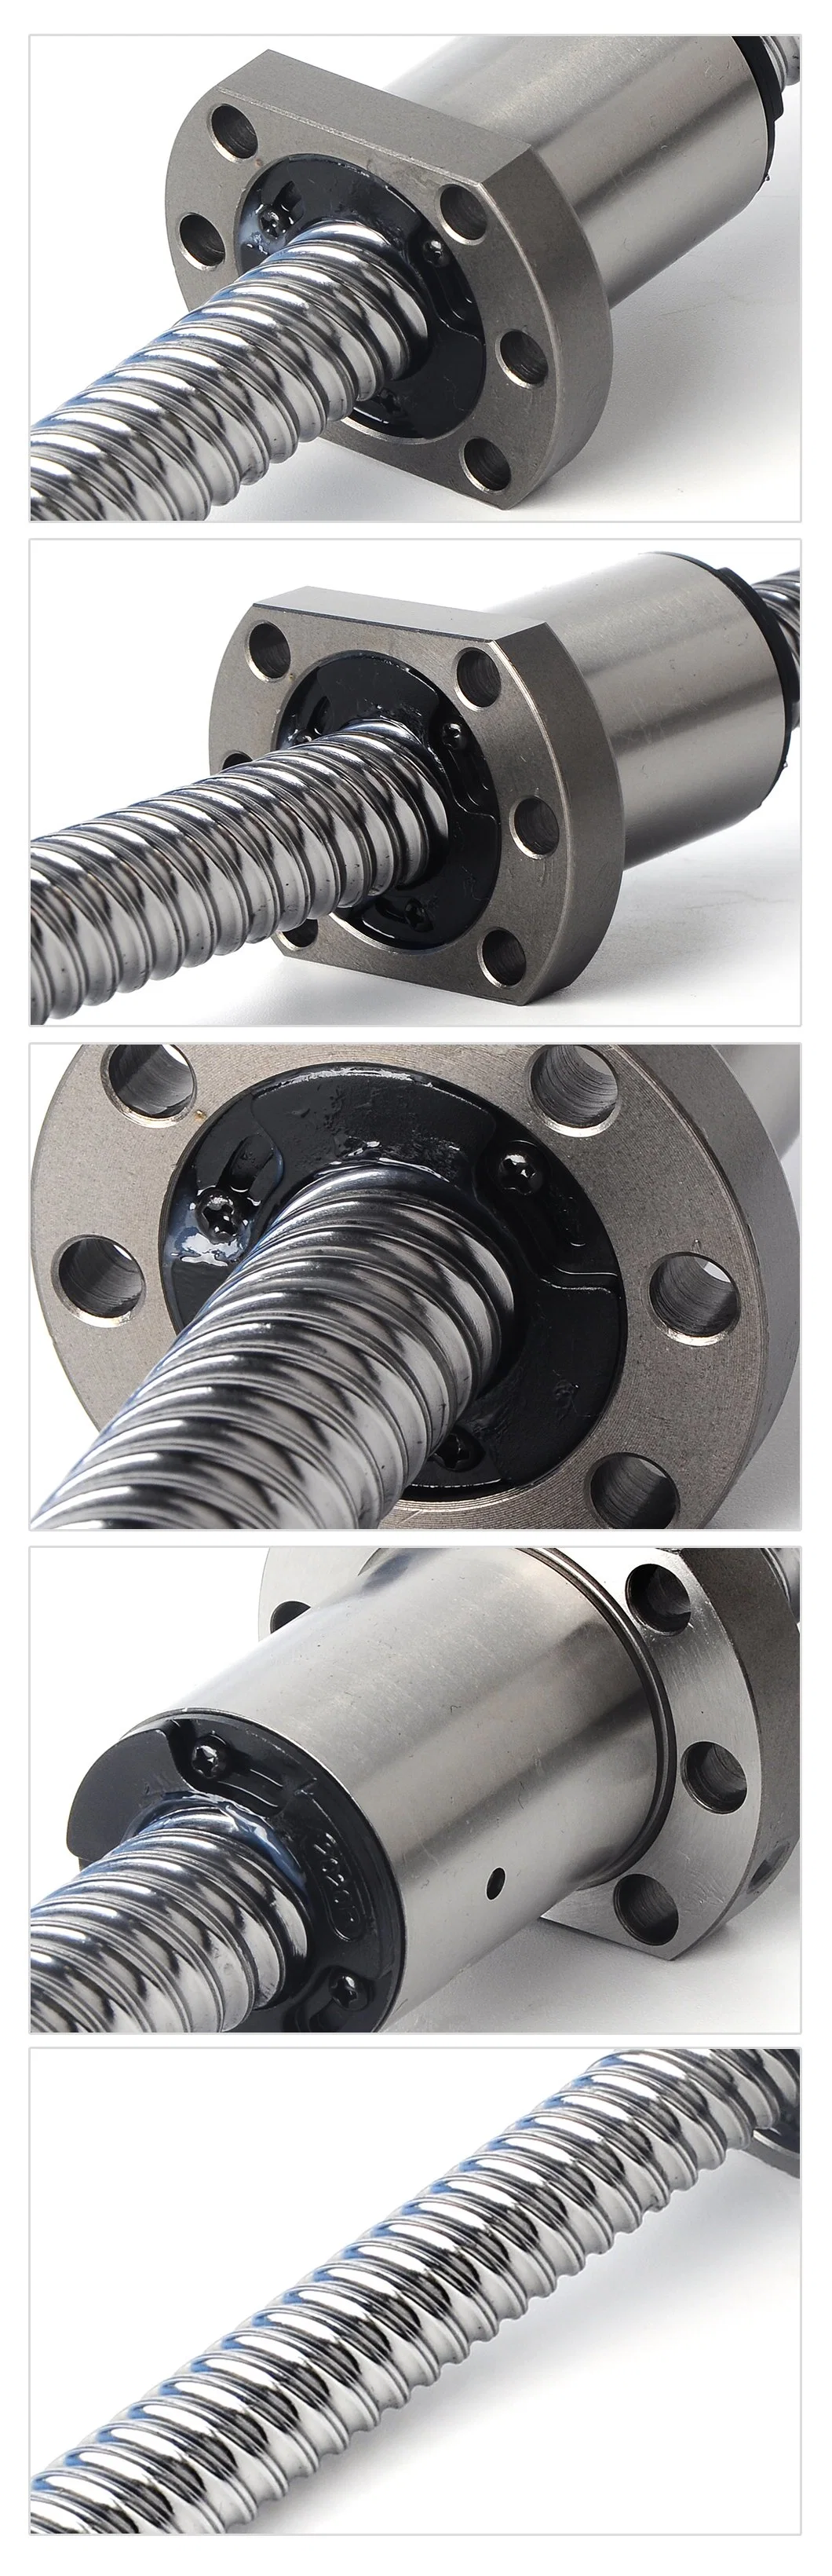 Factory Wholesale Ball Screw Sfs2020 Sfs2020 with End Supports Nut Housings and Coupling